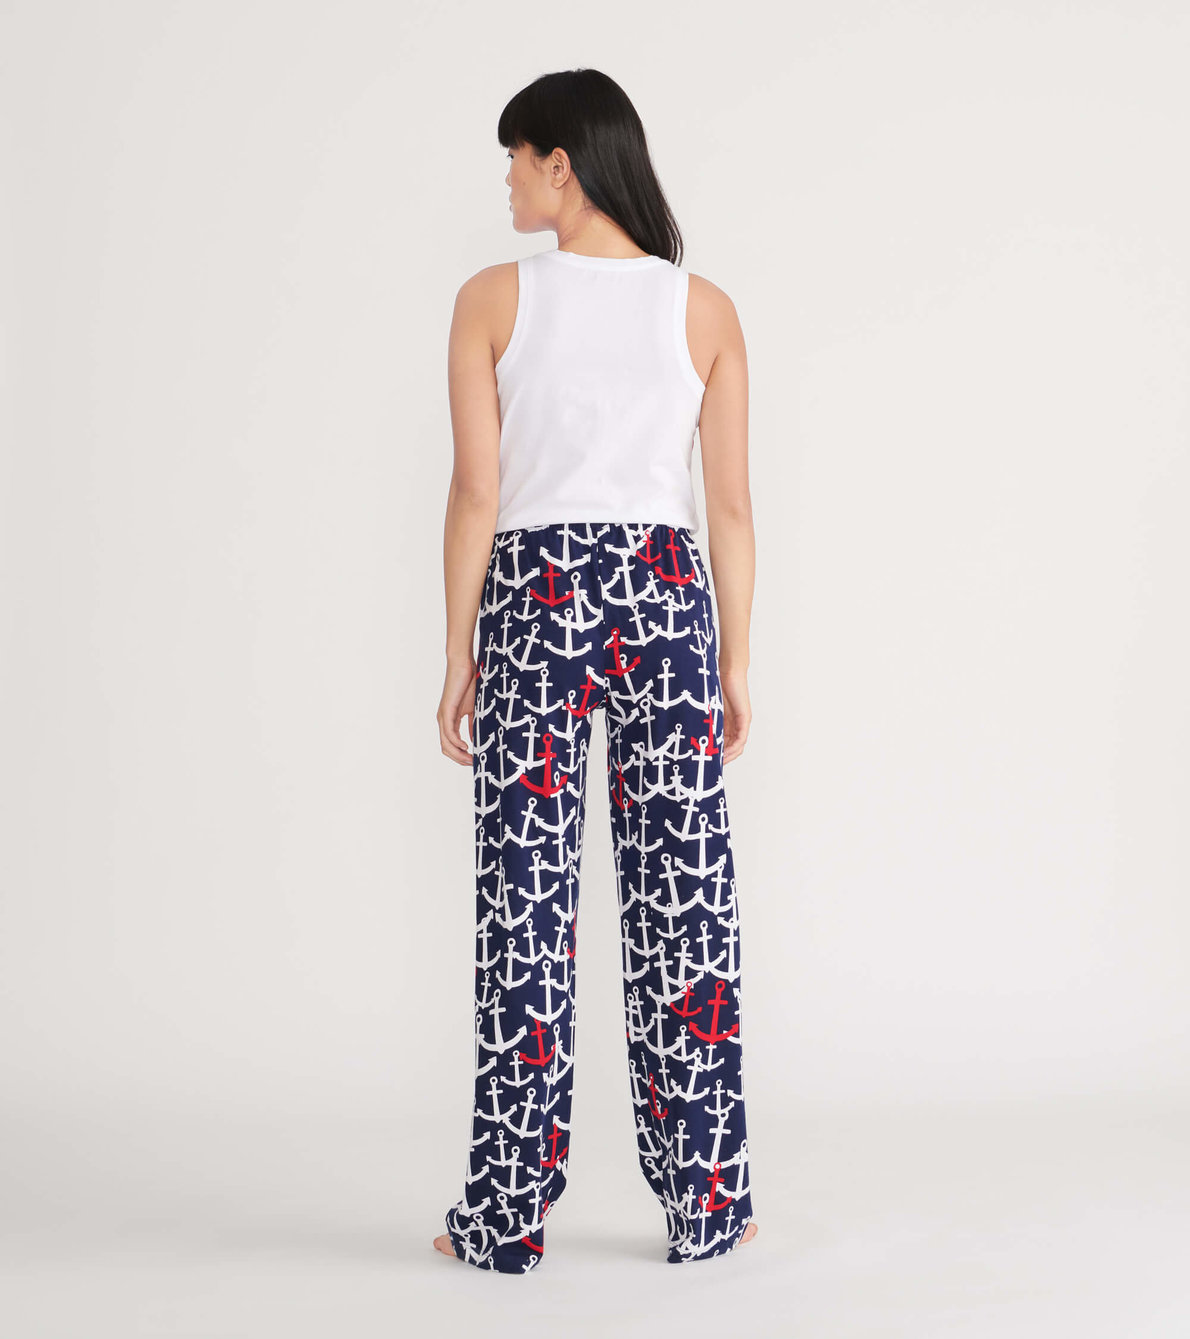 View larger image of Red and White Anchors Women's Jersey Pajama Pants